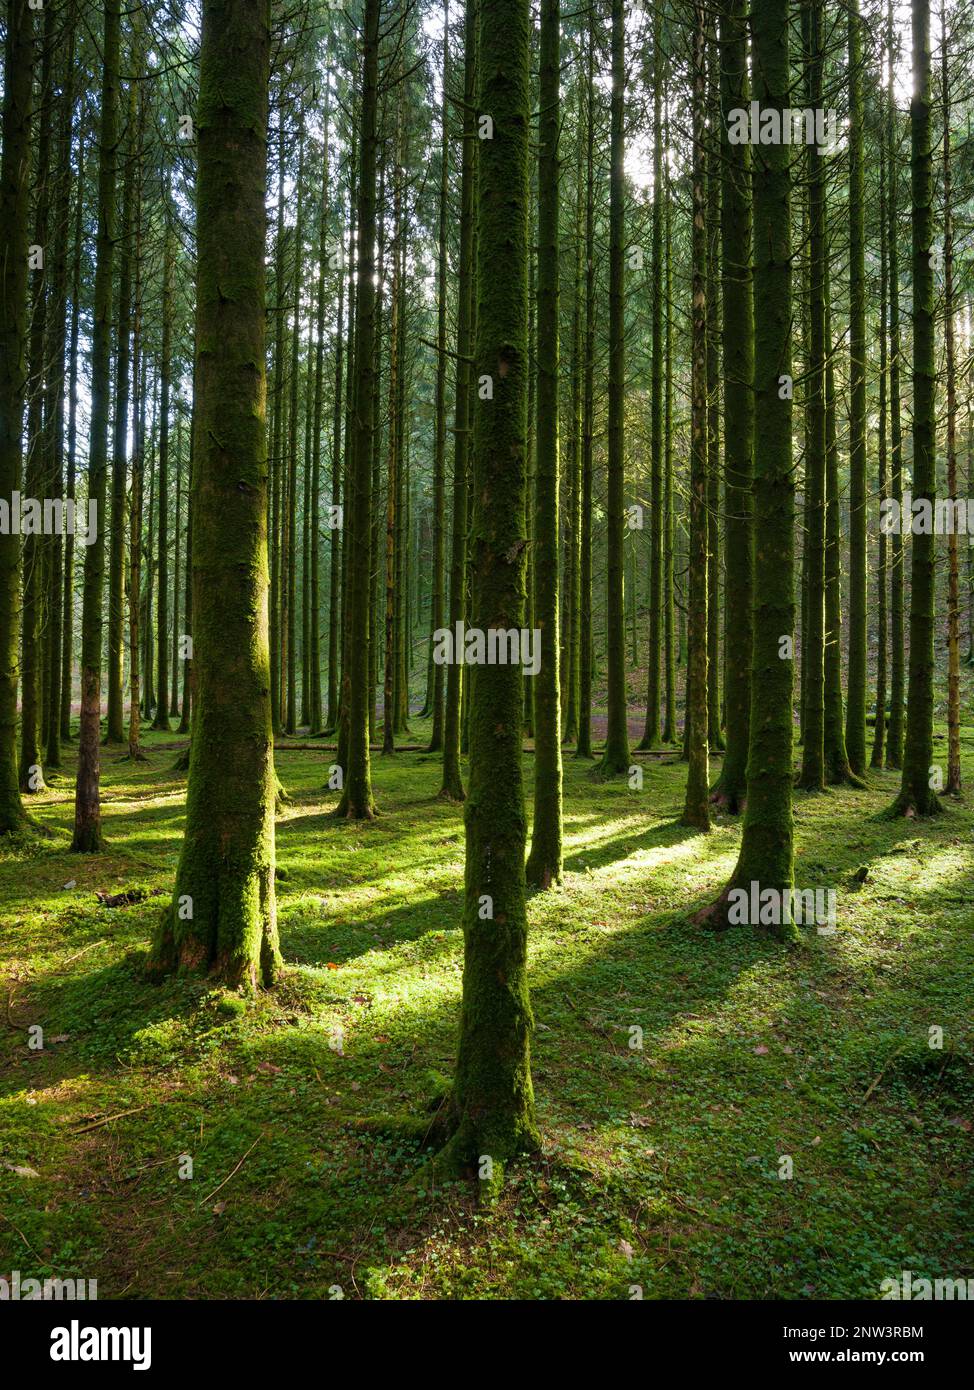 A conifer plantation in the Barle valley near Dulverton in the Exmoor National Park, Somerset, England. Stock Photo